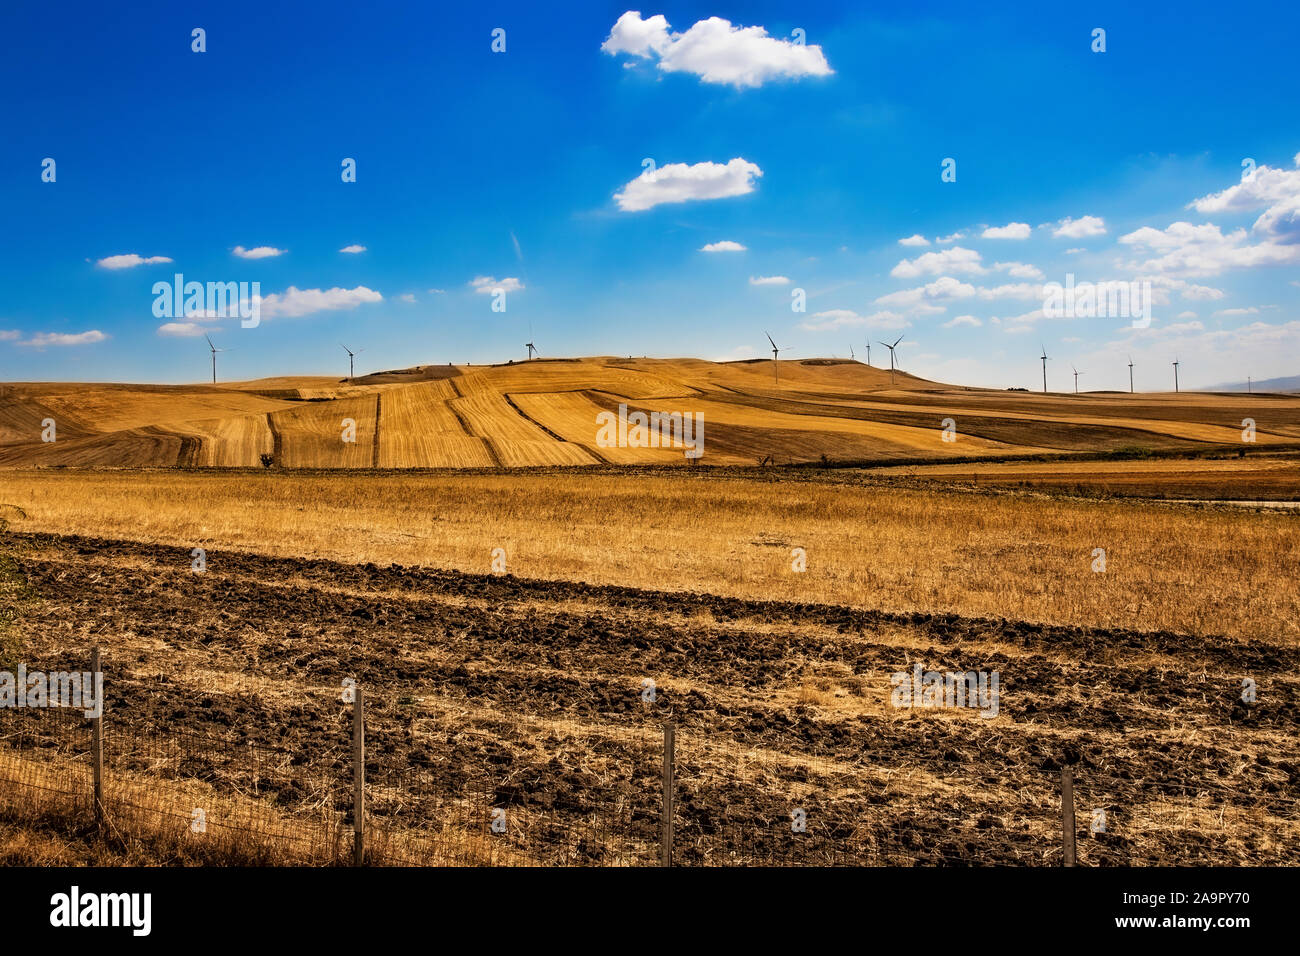 A typical Italian landscape along the motorway of the sun Stock Photo